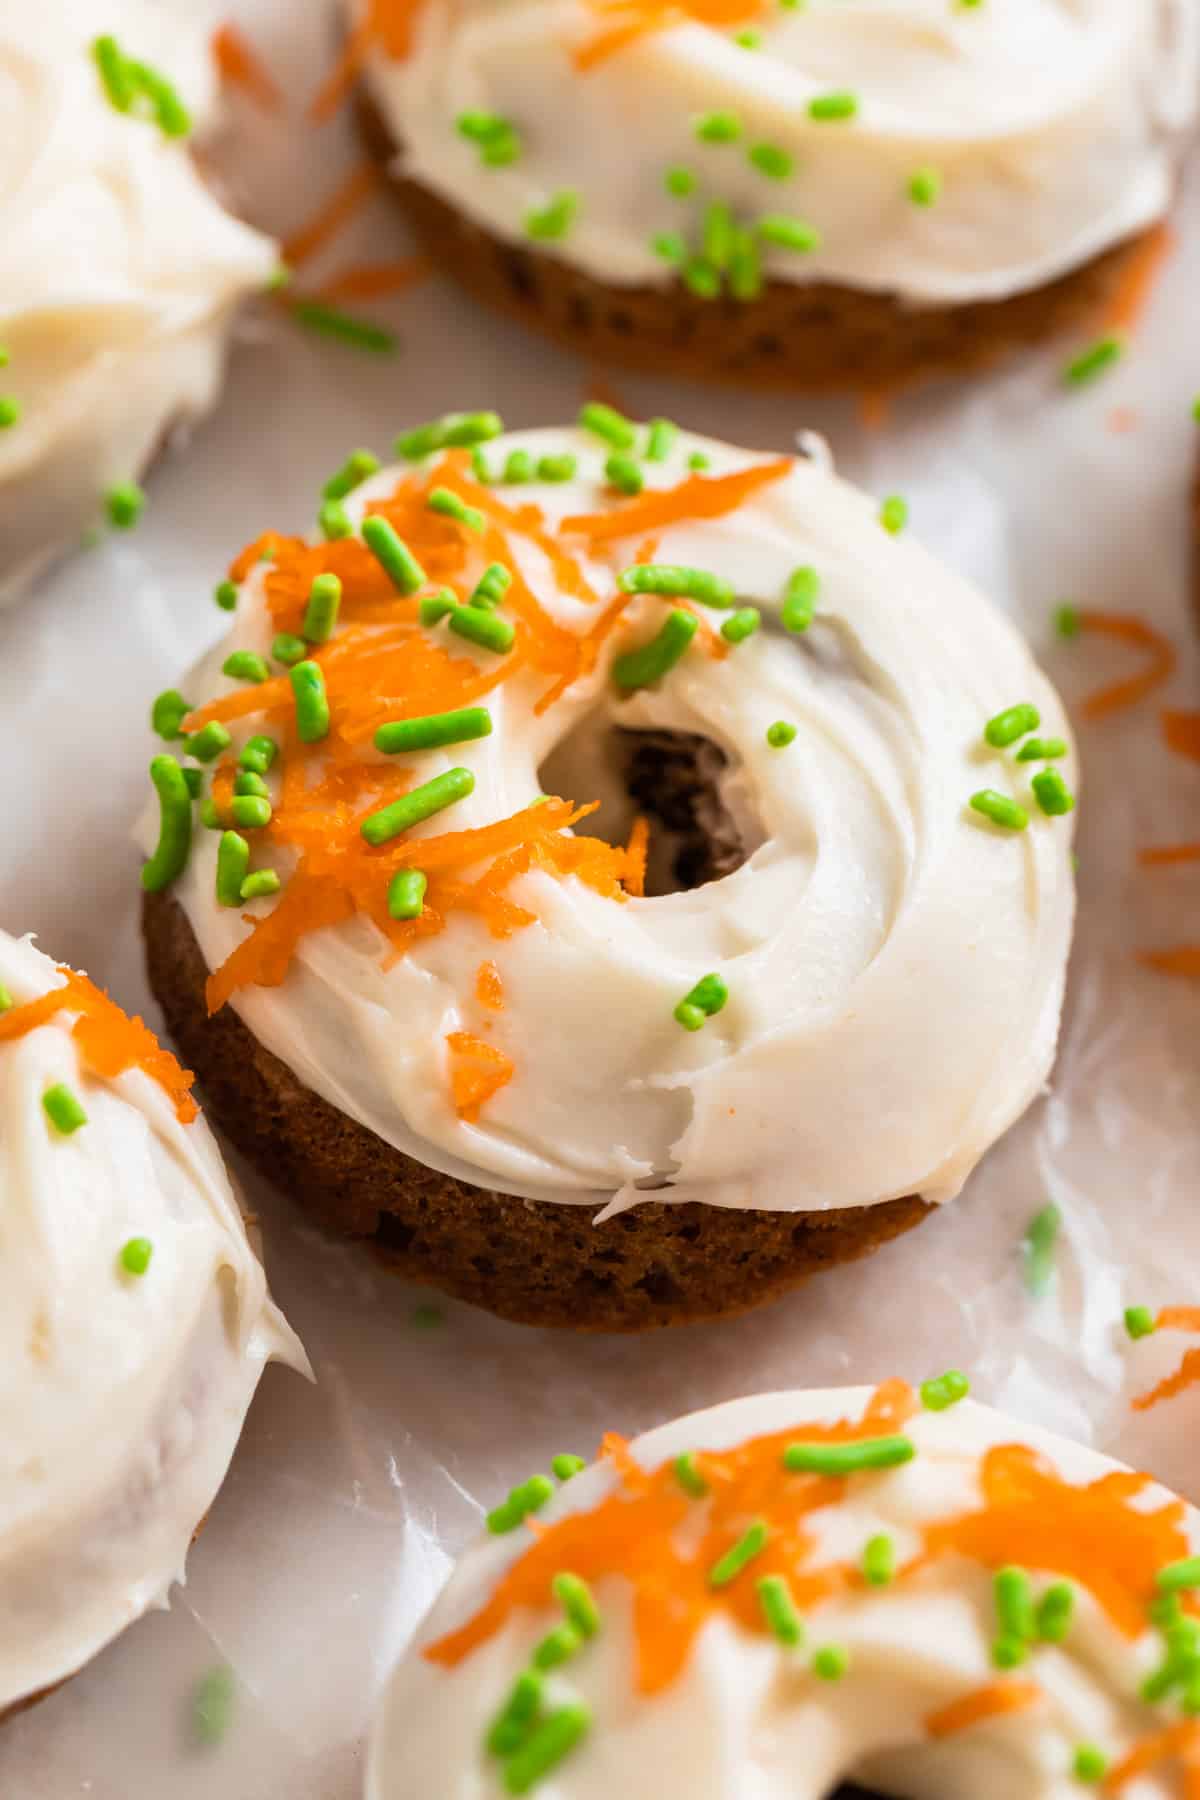 Carrot cake baked donuts with cream cheese frosting topped with shredded carrots and green sprinkles.